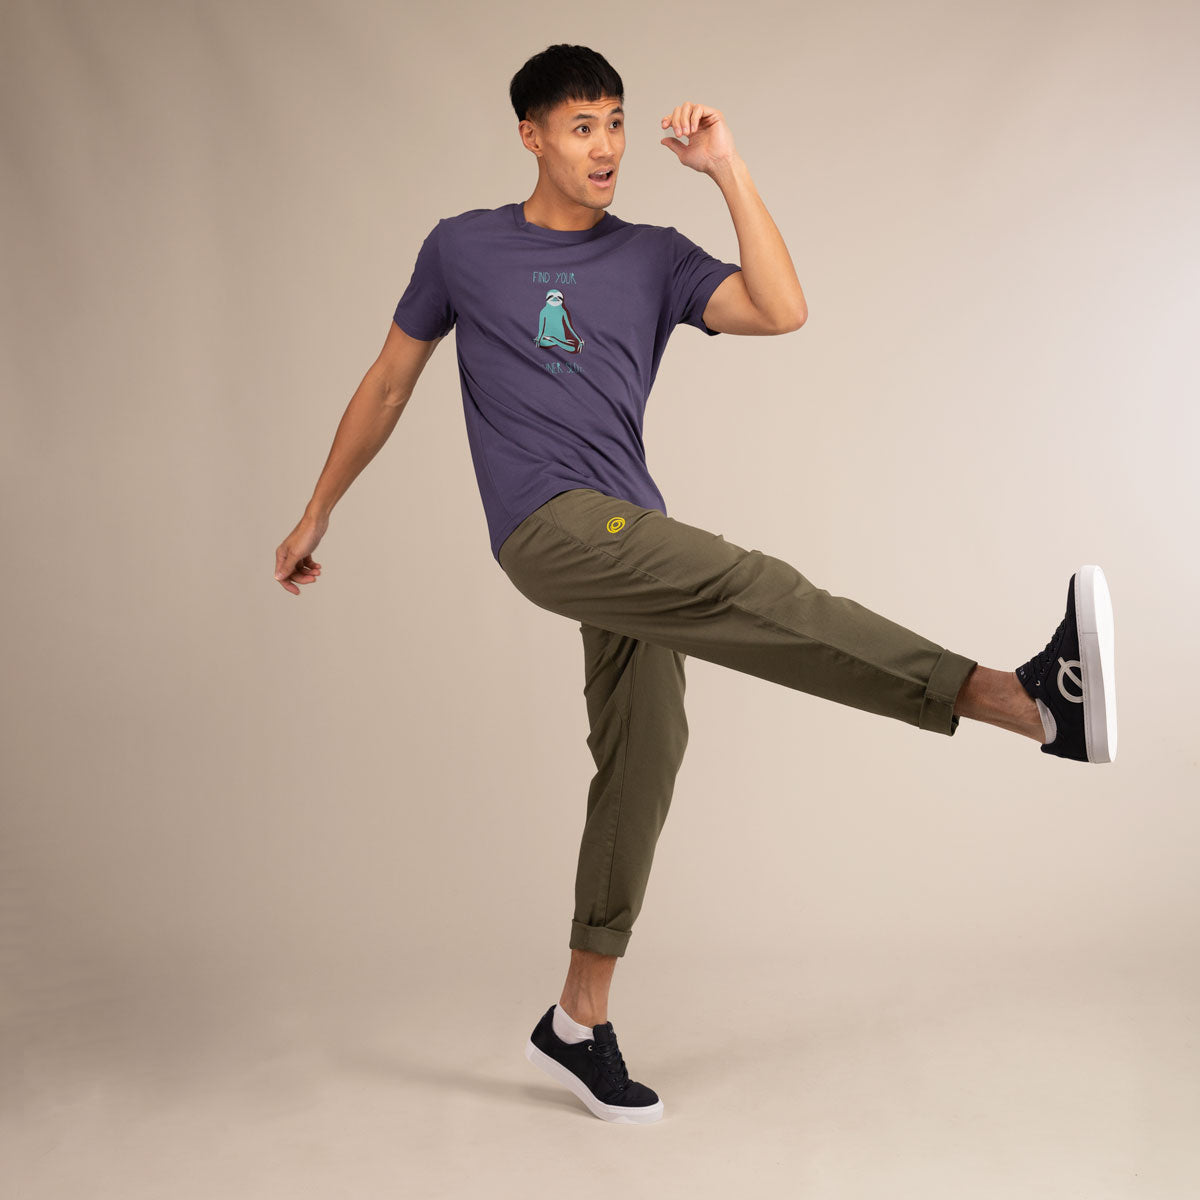 LARK Chinos | Organic Cotton Flexible Chinos | 3RD ROCK Clothing -  Donald is 6ft 1 with a 29" waist, 36" hips and wears a 30/LL.  M